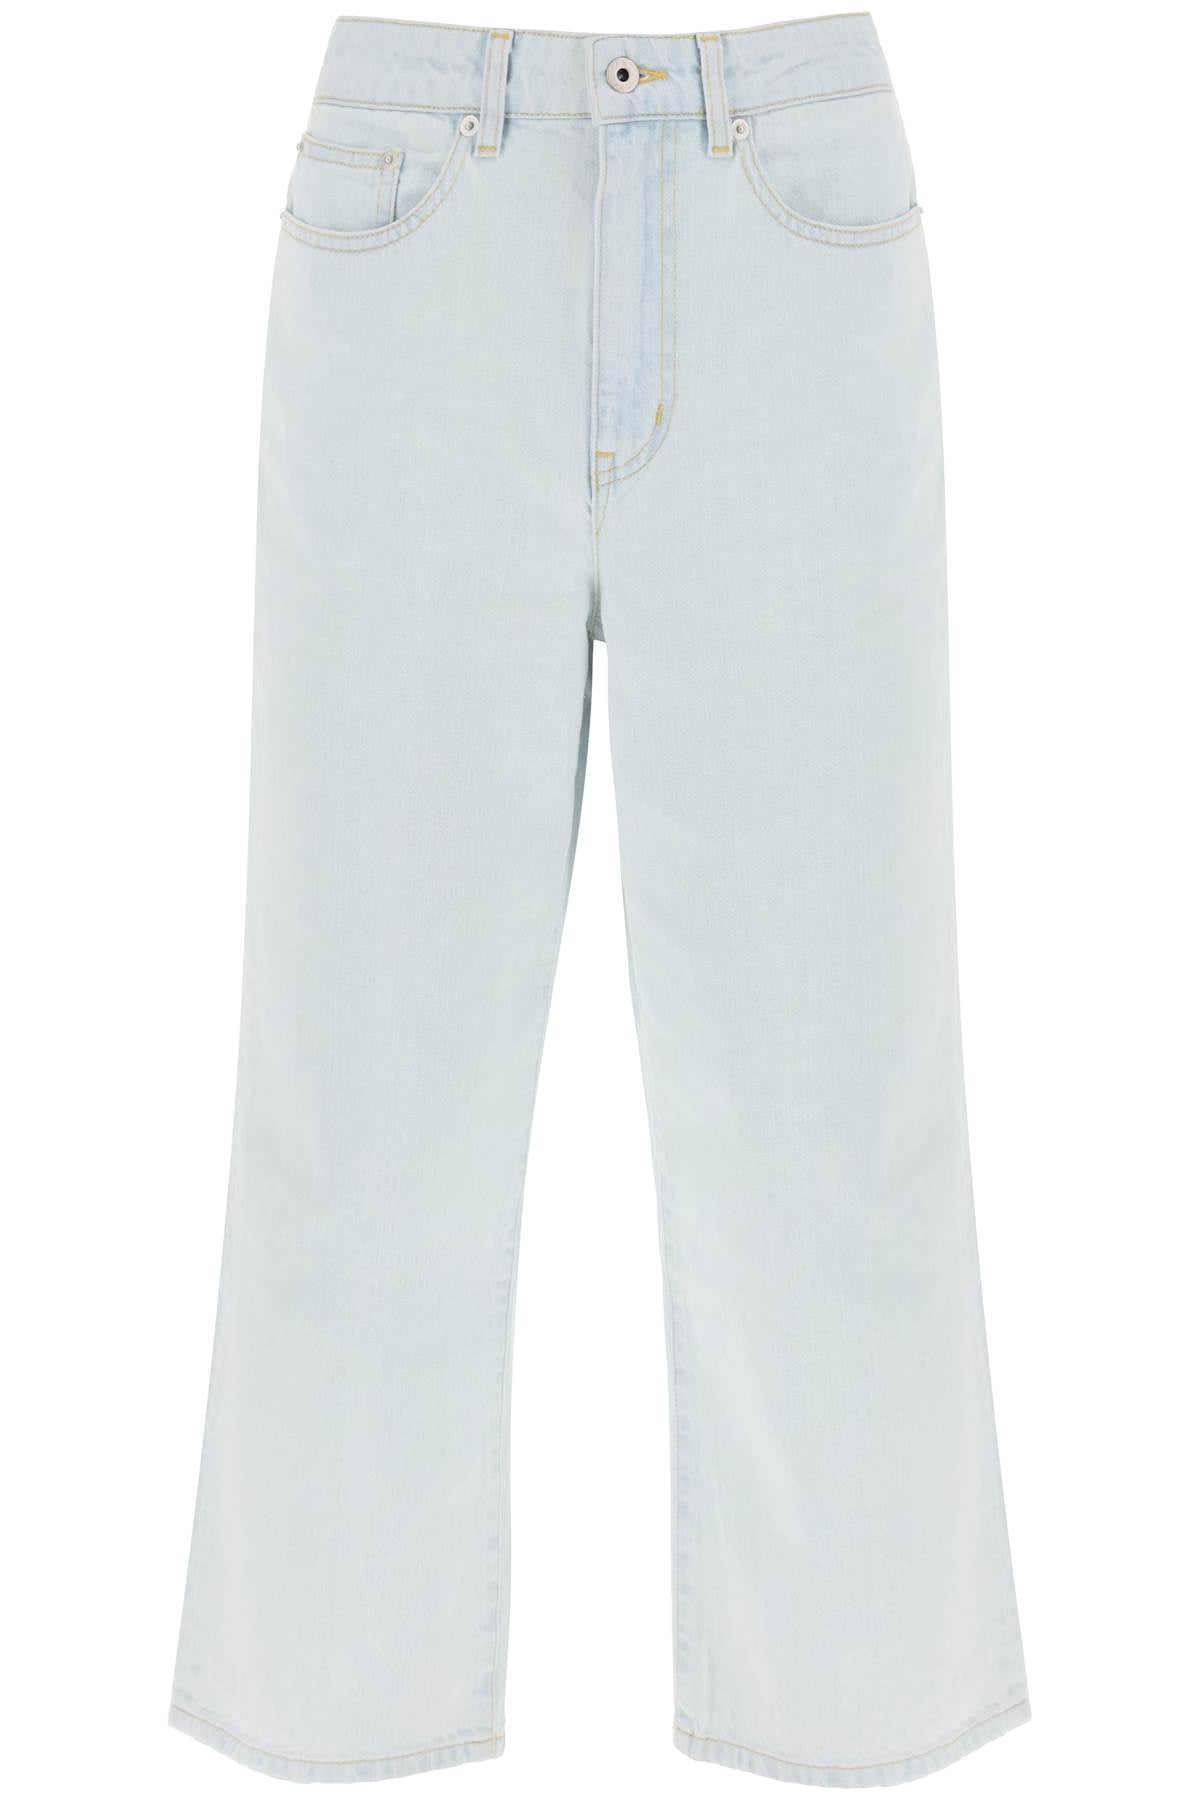 Kenzo 'sumire' cropped jeans with wide leg FD62DP2236B4 BLEACHED BLUE DENIM